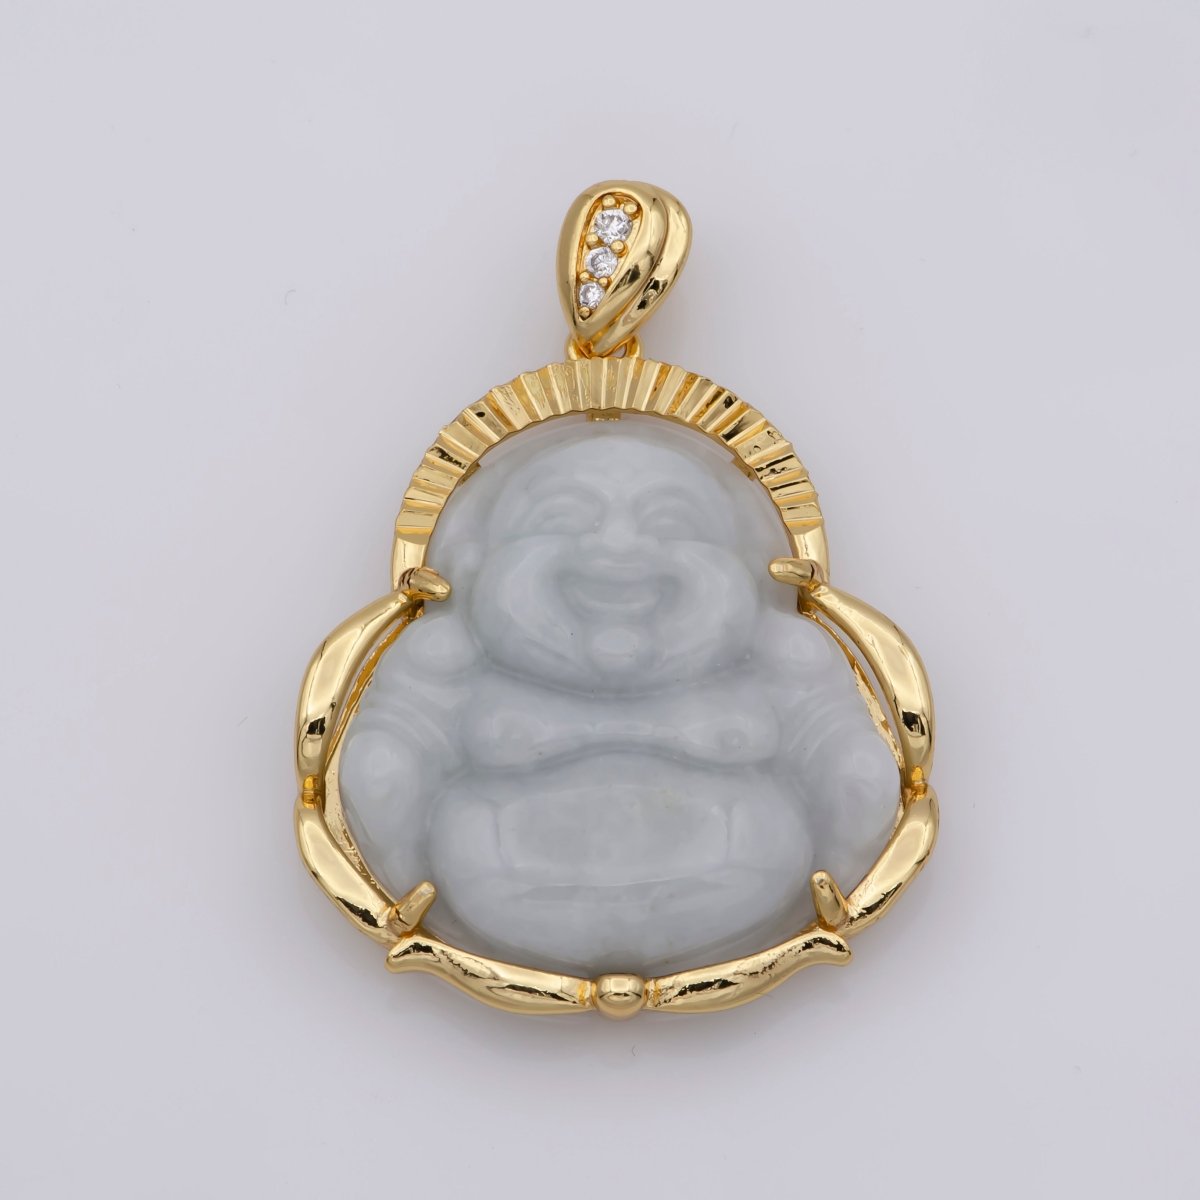 1x Laughing Buddha Jade Pendant for Necklace, Dark green Jade, Light Green Jade charm necklace. O-150 - DLUXCA